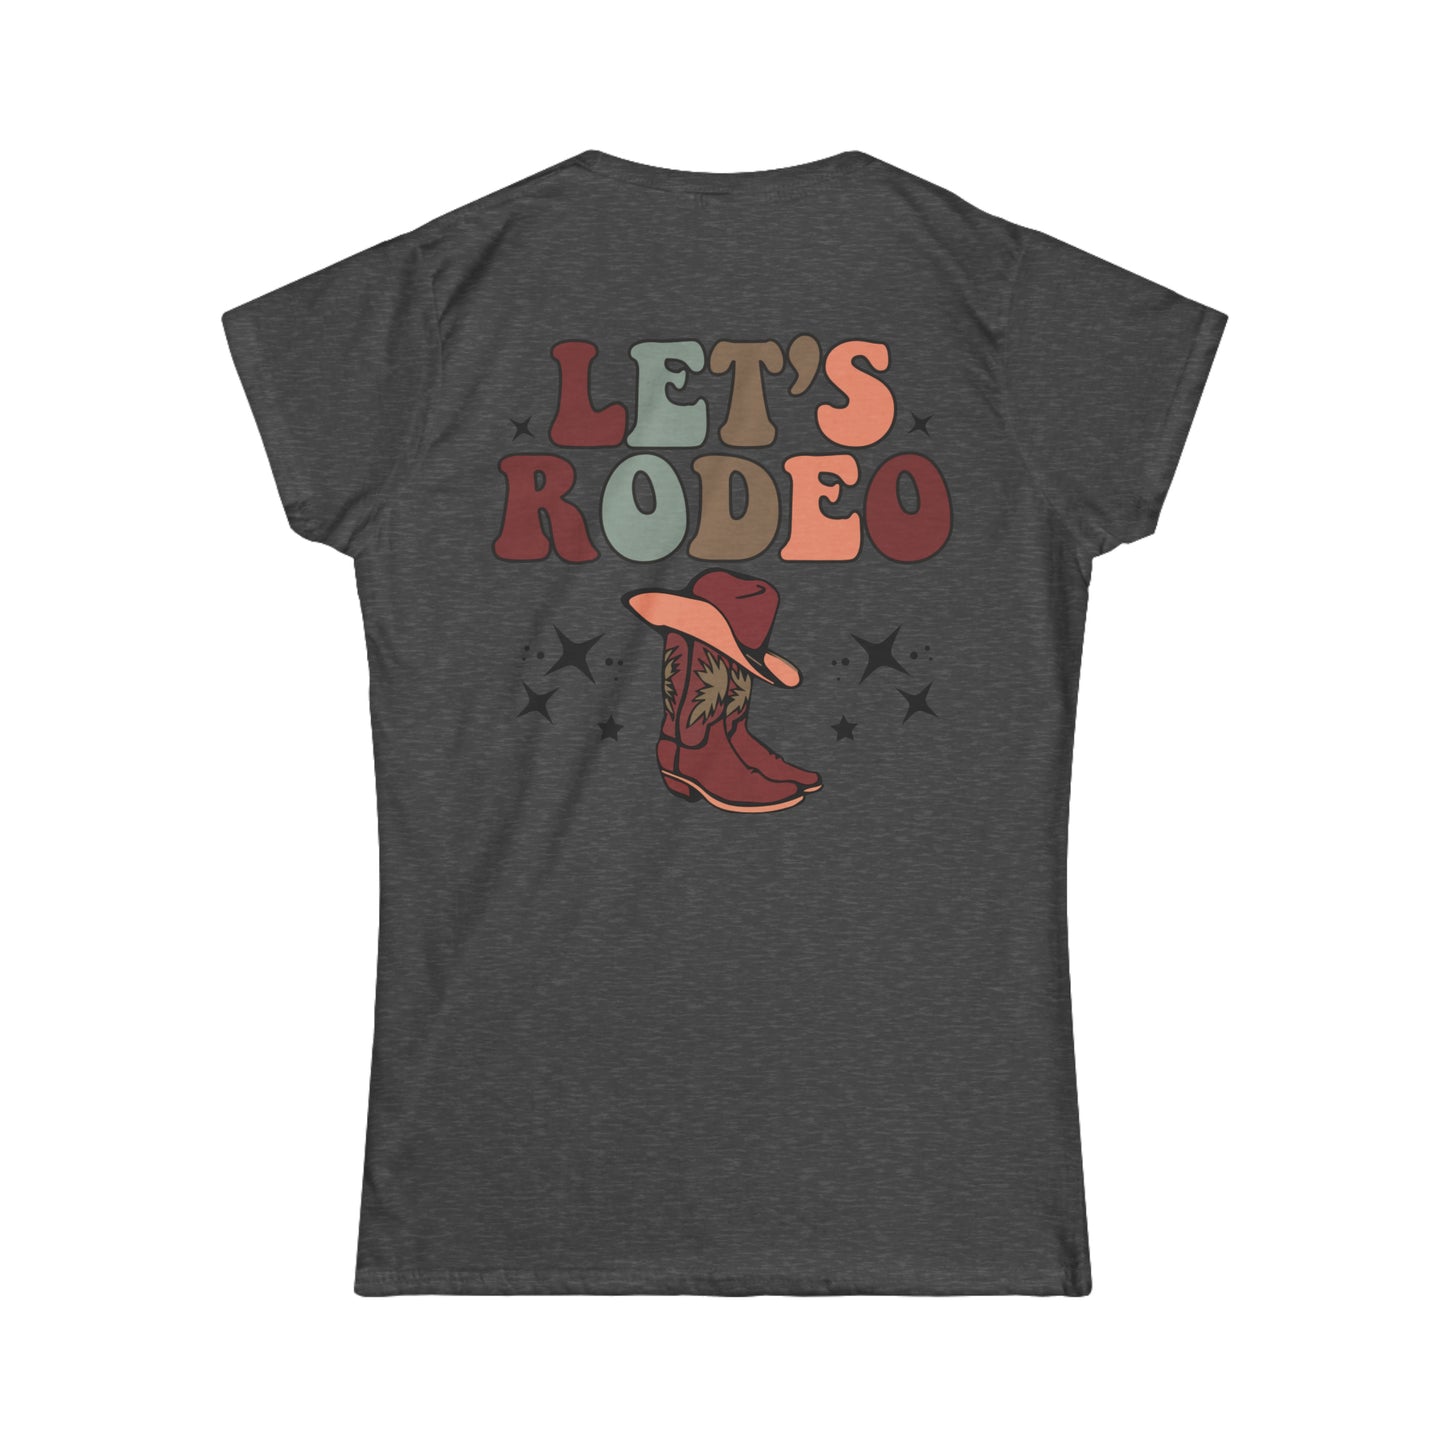 Softstyle Lets Rodeo Tee